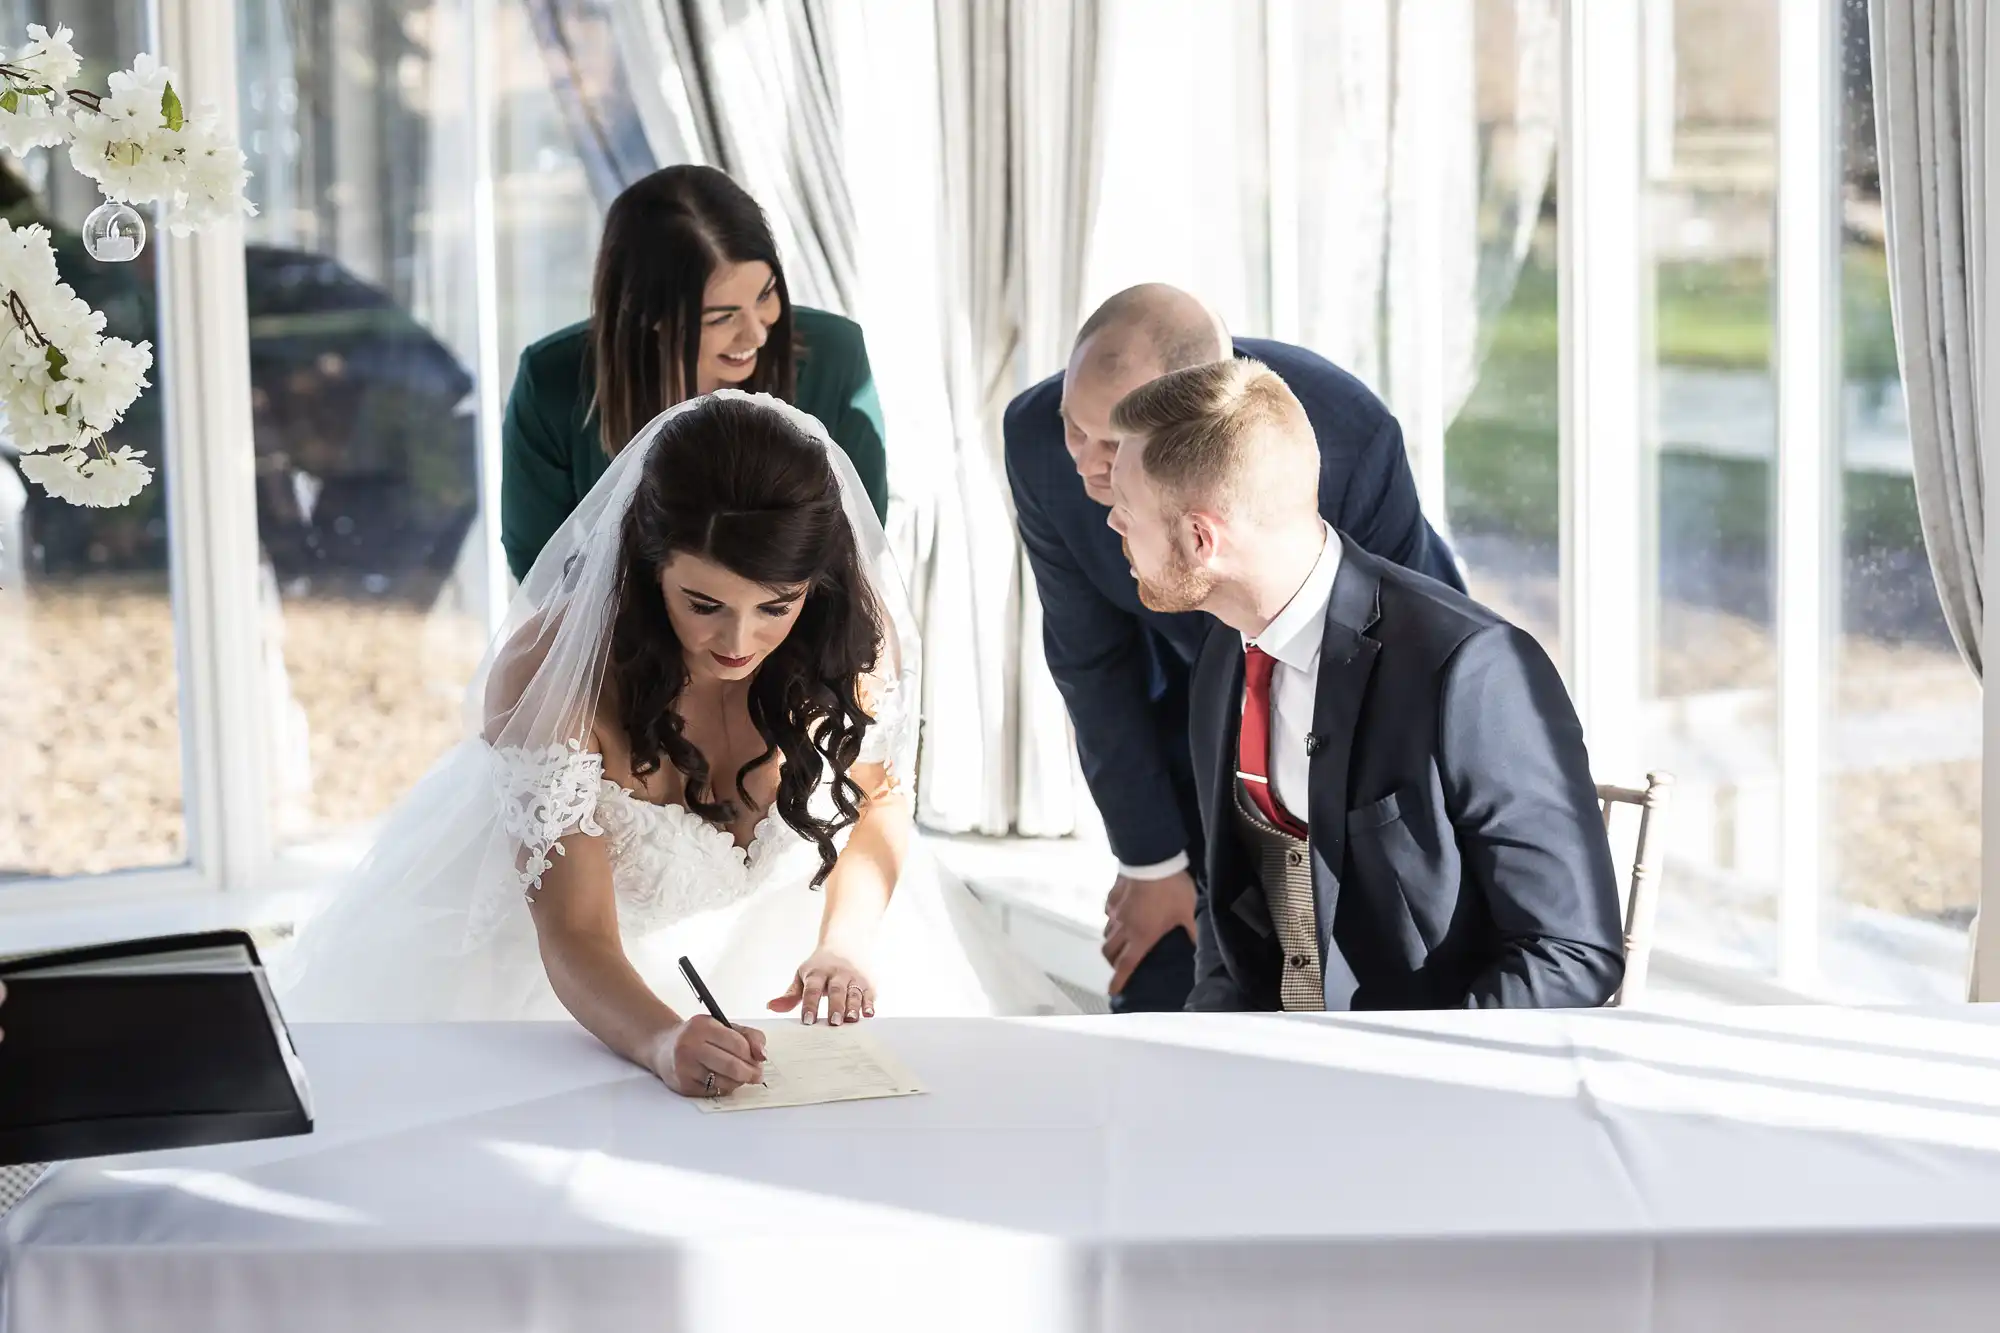 A bride and groom, with two witnesses, sign the marriage certificate at a well-lit table during their wedding ceremony. The bride is signing the document, with the groom and witnesses looking on.